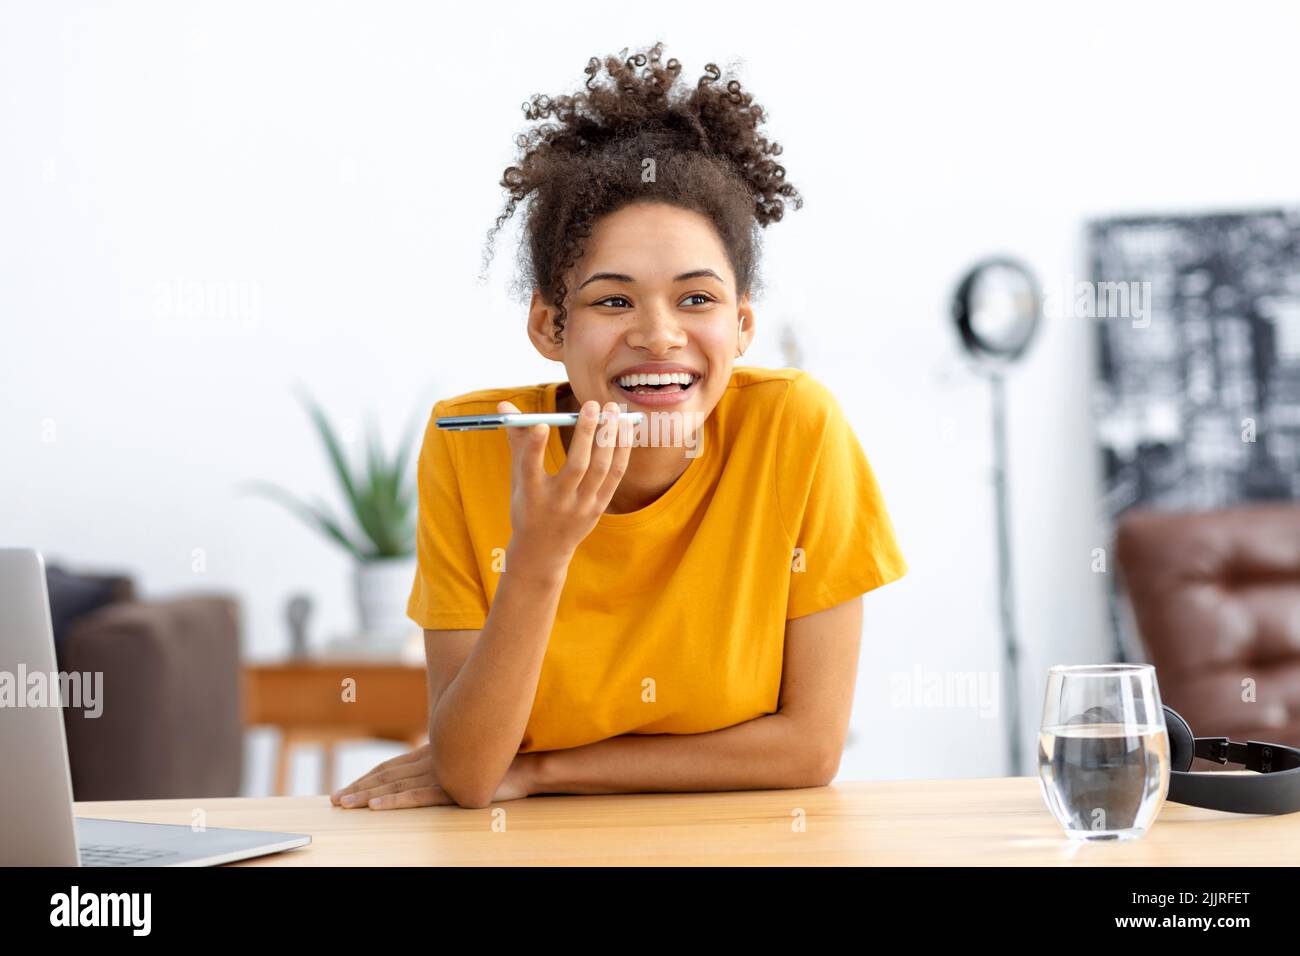 Young African american woman sending voice message through using mobile phone smiling friendly Stock Photo